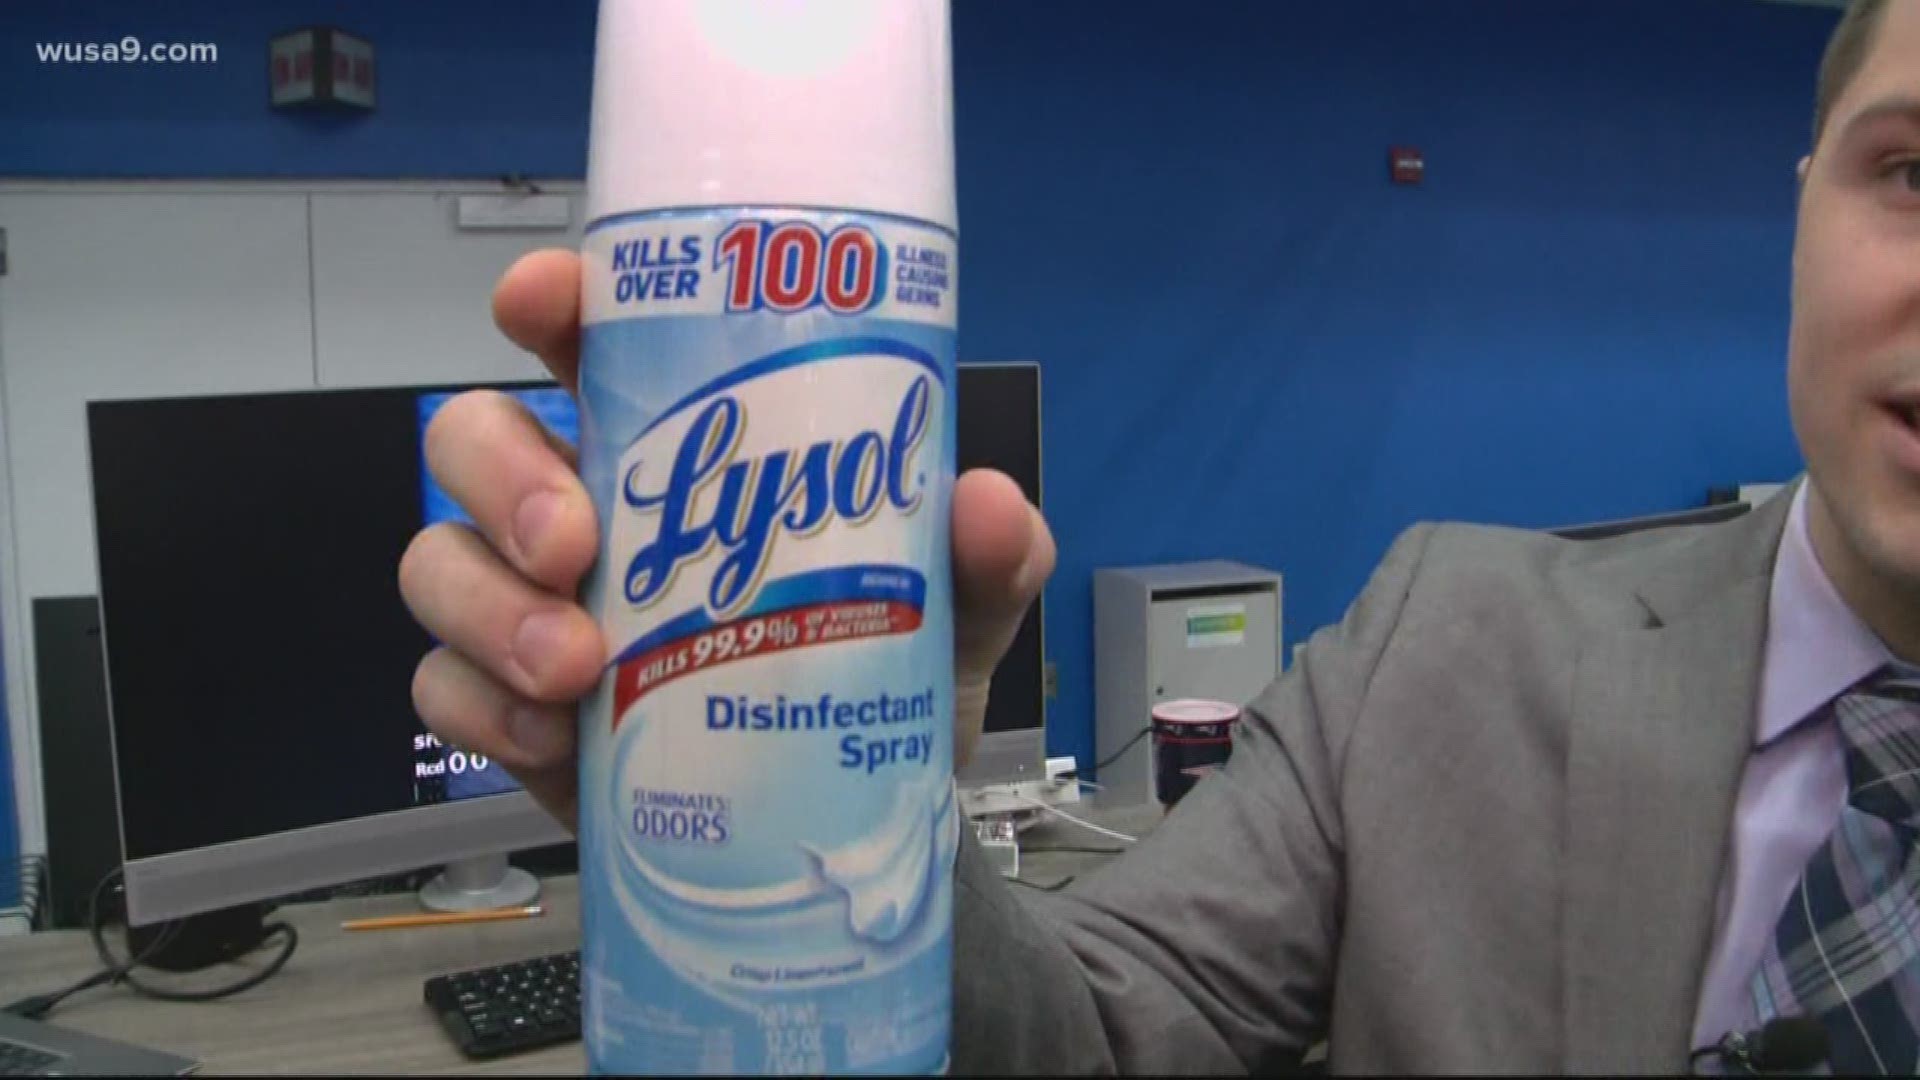 All over social media, people speculated that companies like Lysol and Clorox were aware of the incoming epidemic in China.